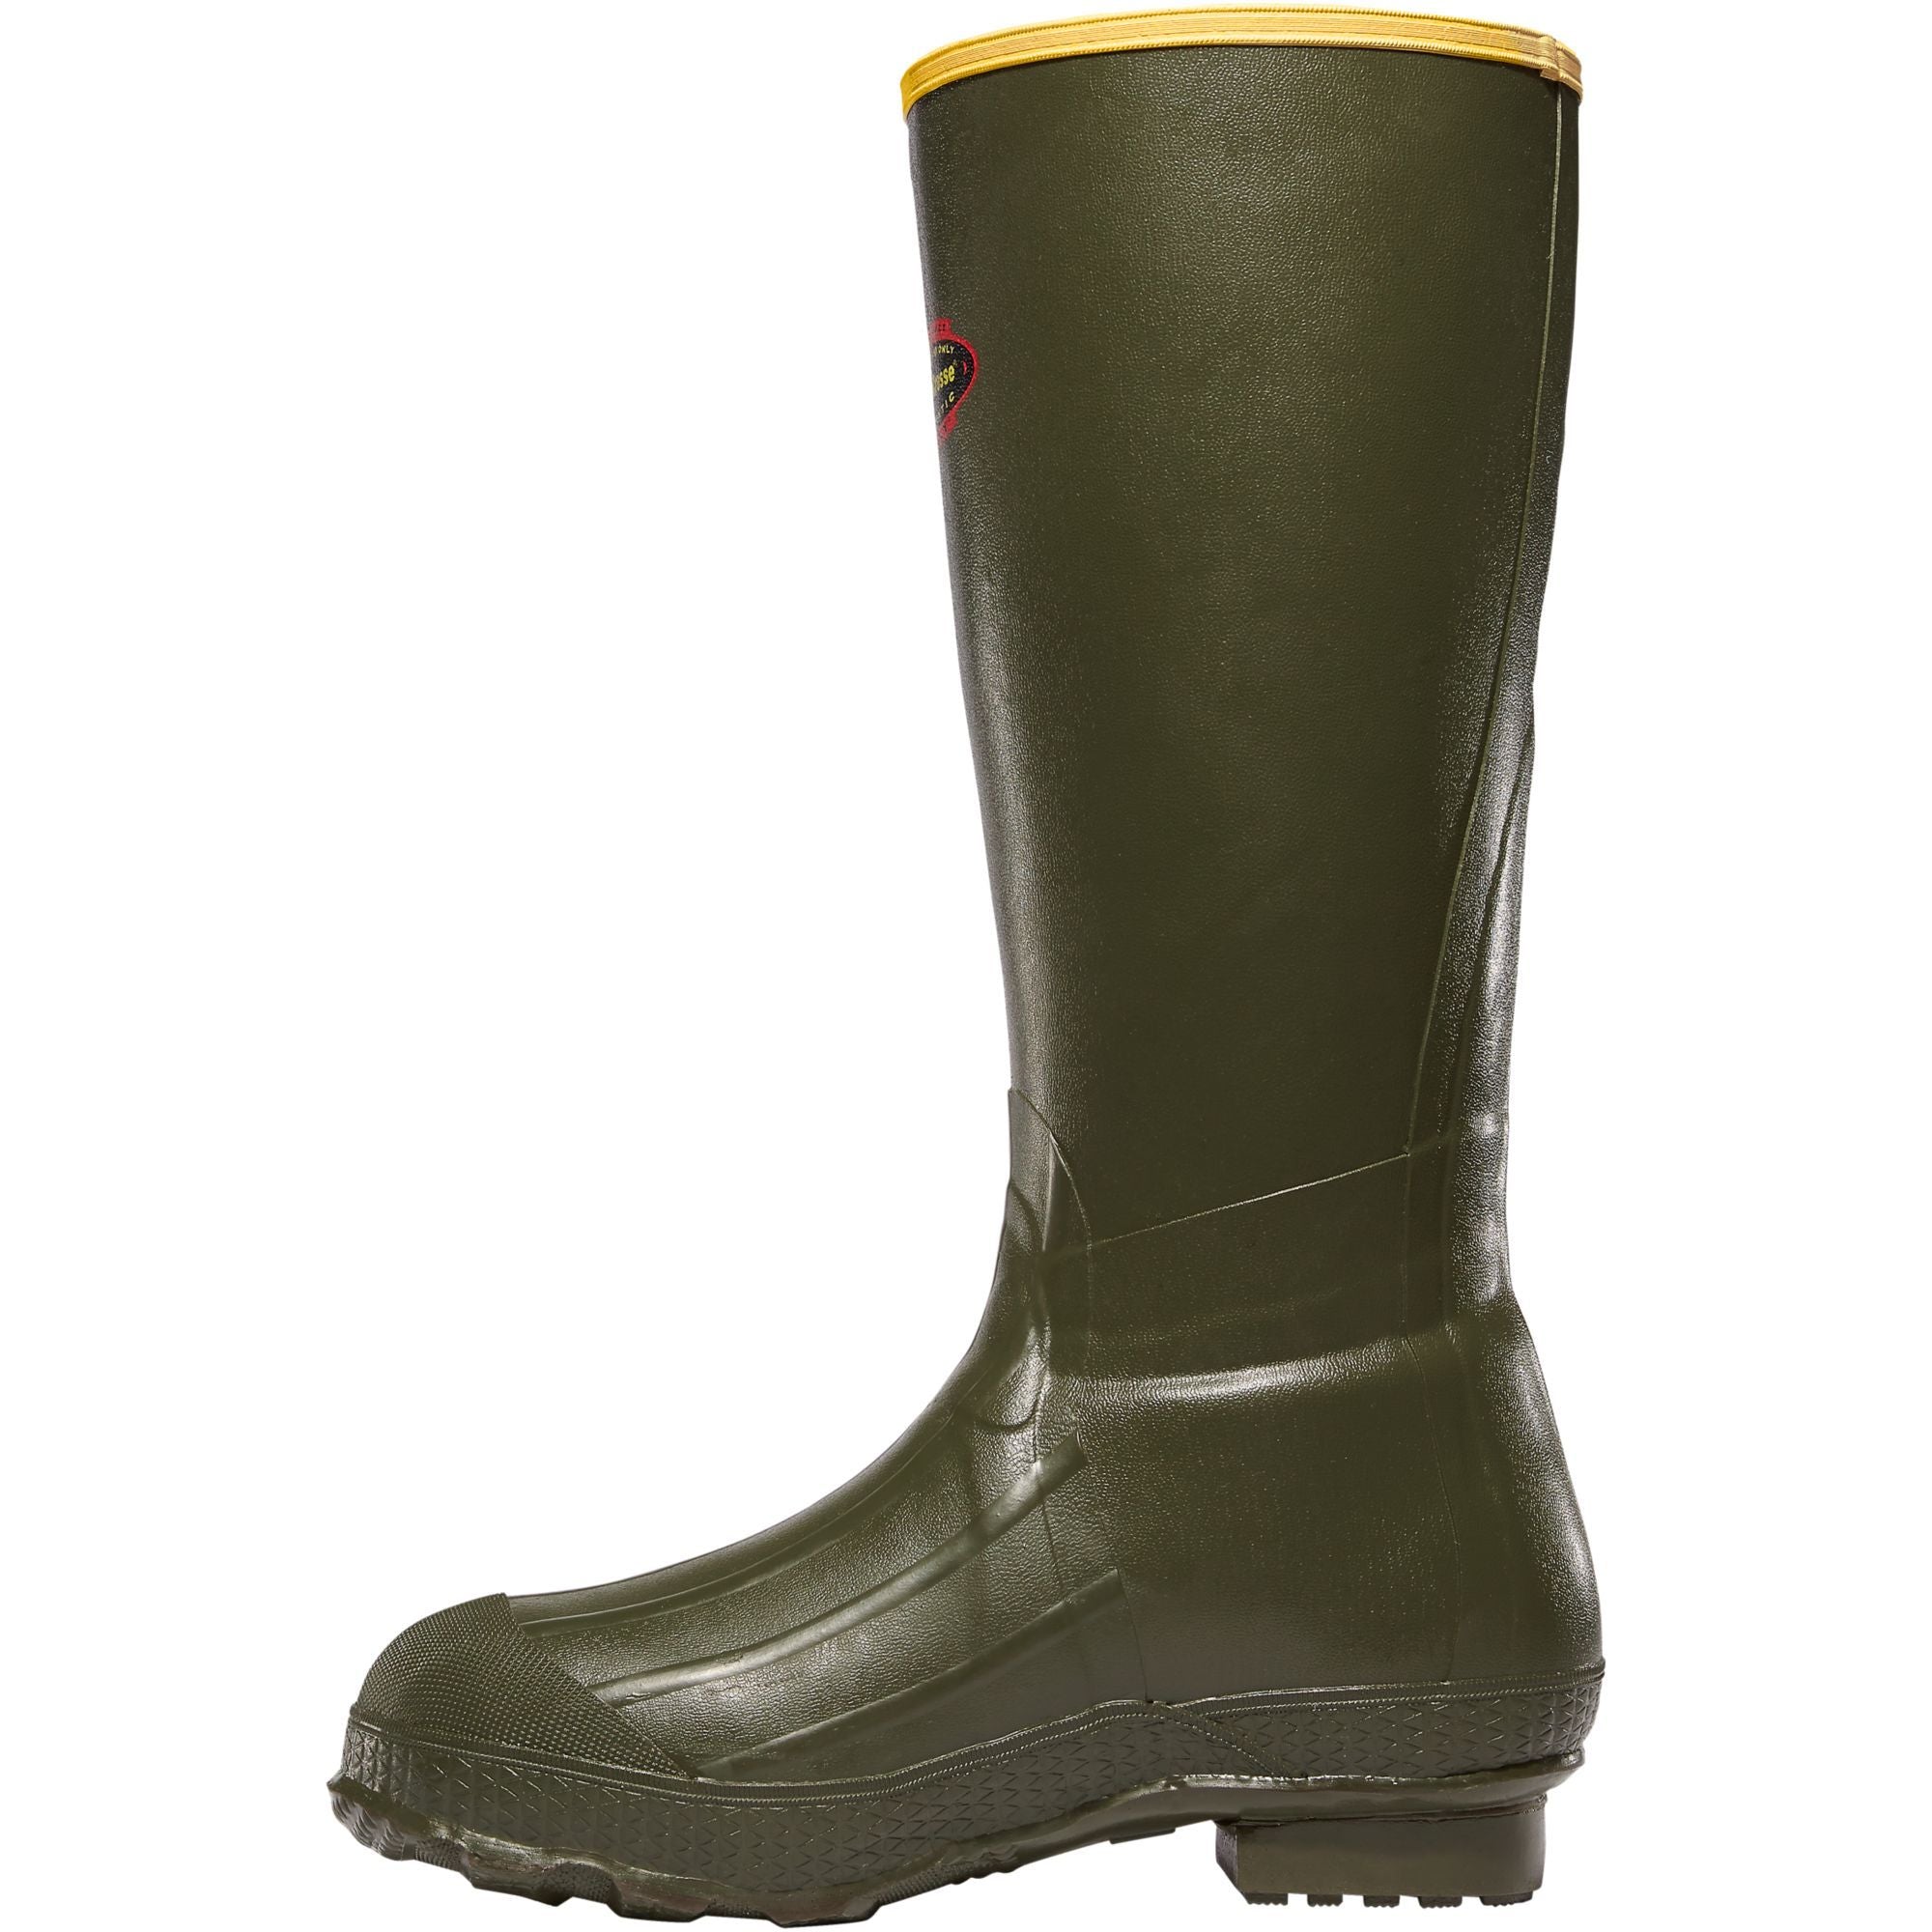 LaCrosse Men's Burly Classic 18" OD Rubber Work Boot - Green - 266040  - Overlook Boots